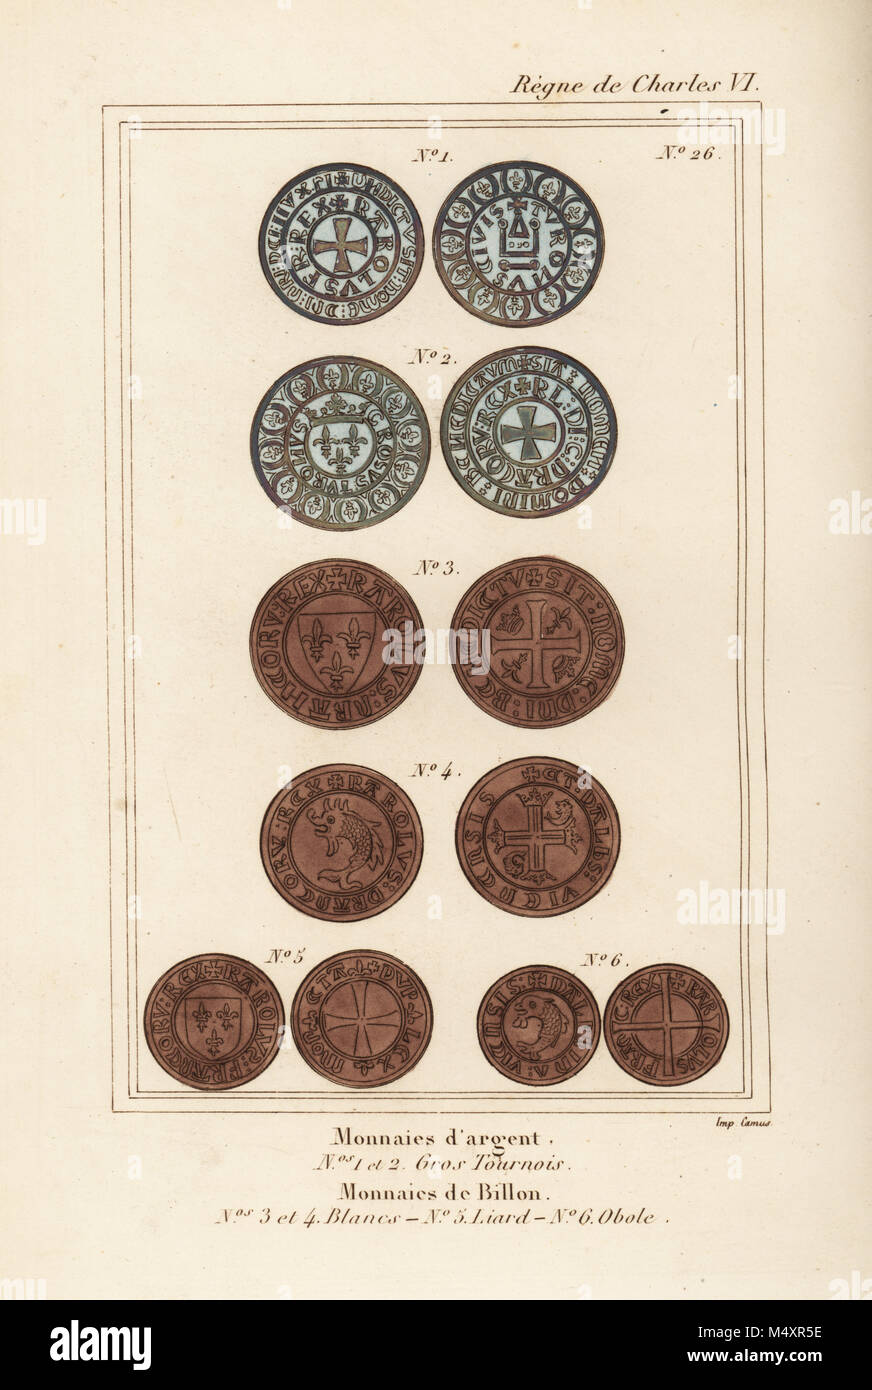 French medieval silver (argent) and copper (billon) coins with coat of arms: gros tournois 1,2, blancs 3,4, liard 5, and obole 6. Handcoloured lithograph from Le Bibliophile Jacob aka Paul Lacroix's Costumes Historiques de la France (Historical Costumes of France), Administration de Librairie, Paris, 1852. Stock Photo